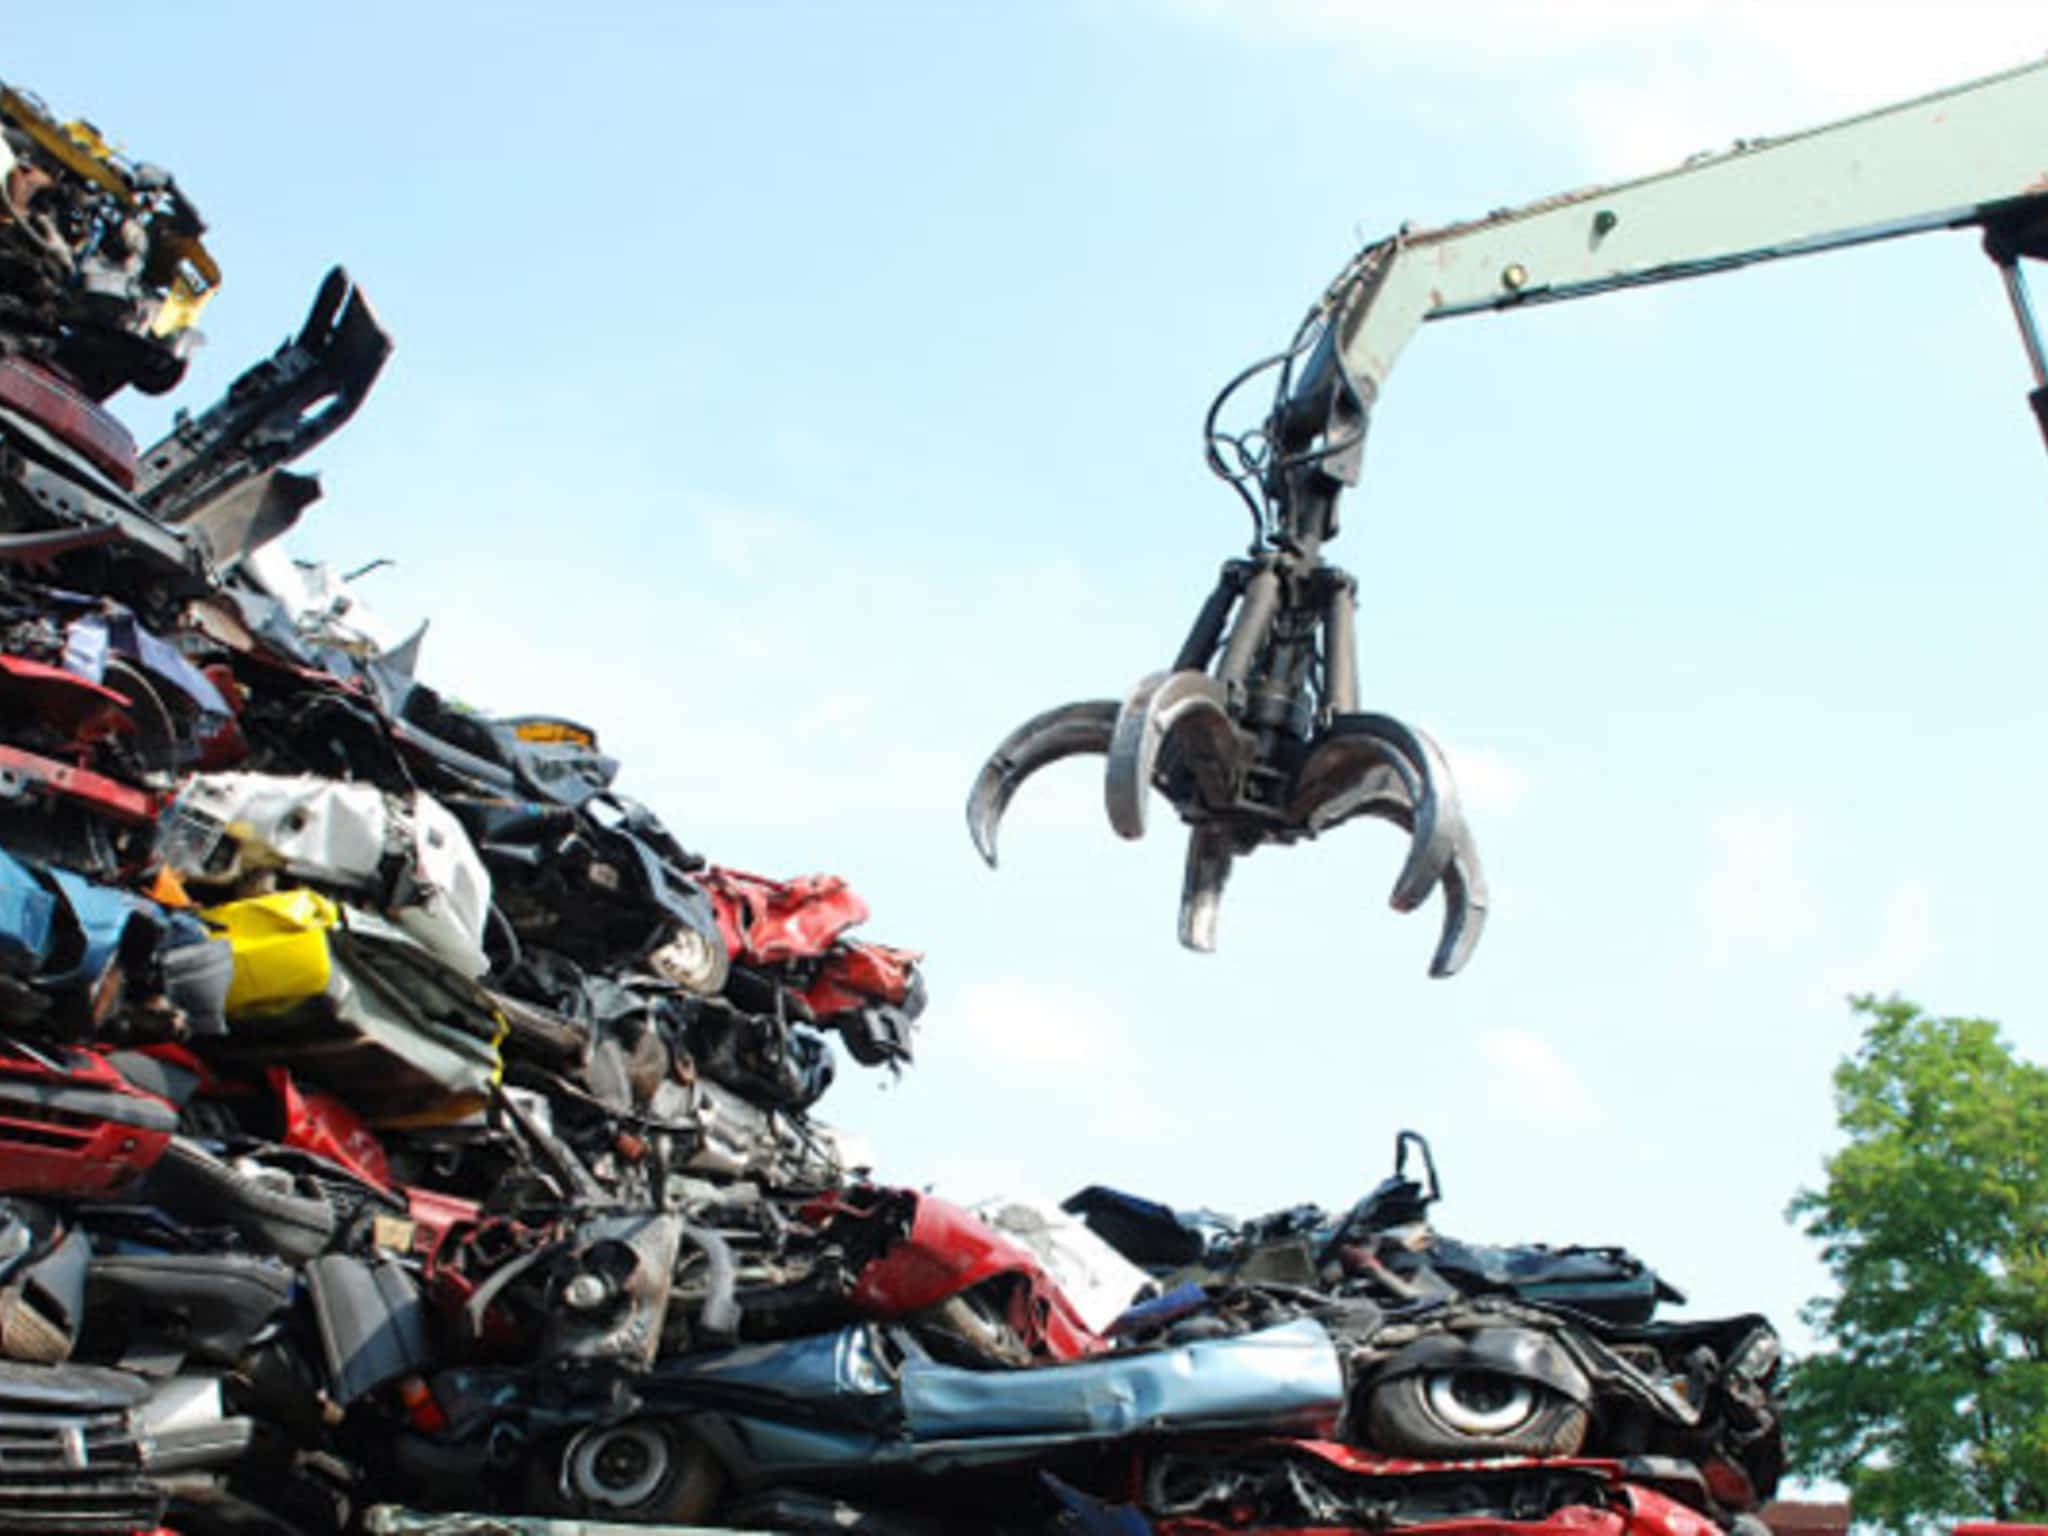 photo Whittle's Auto Recycling